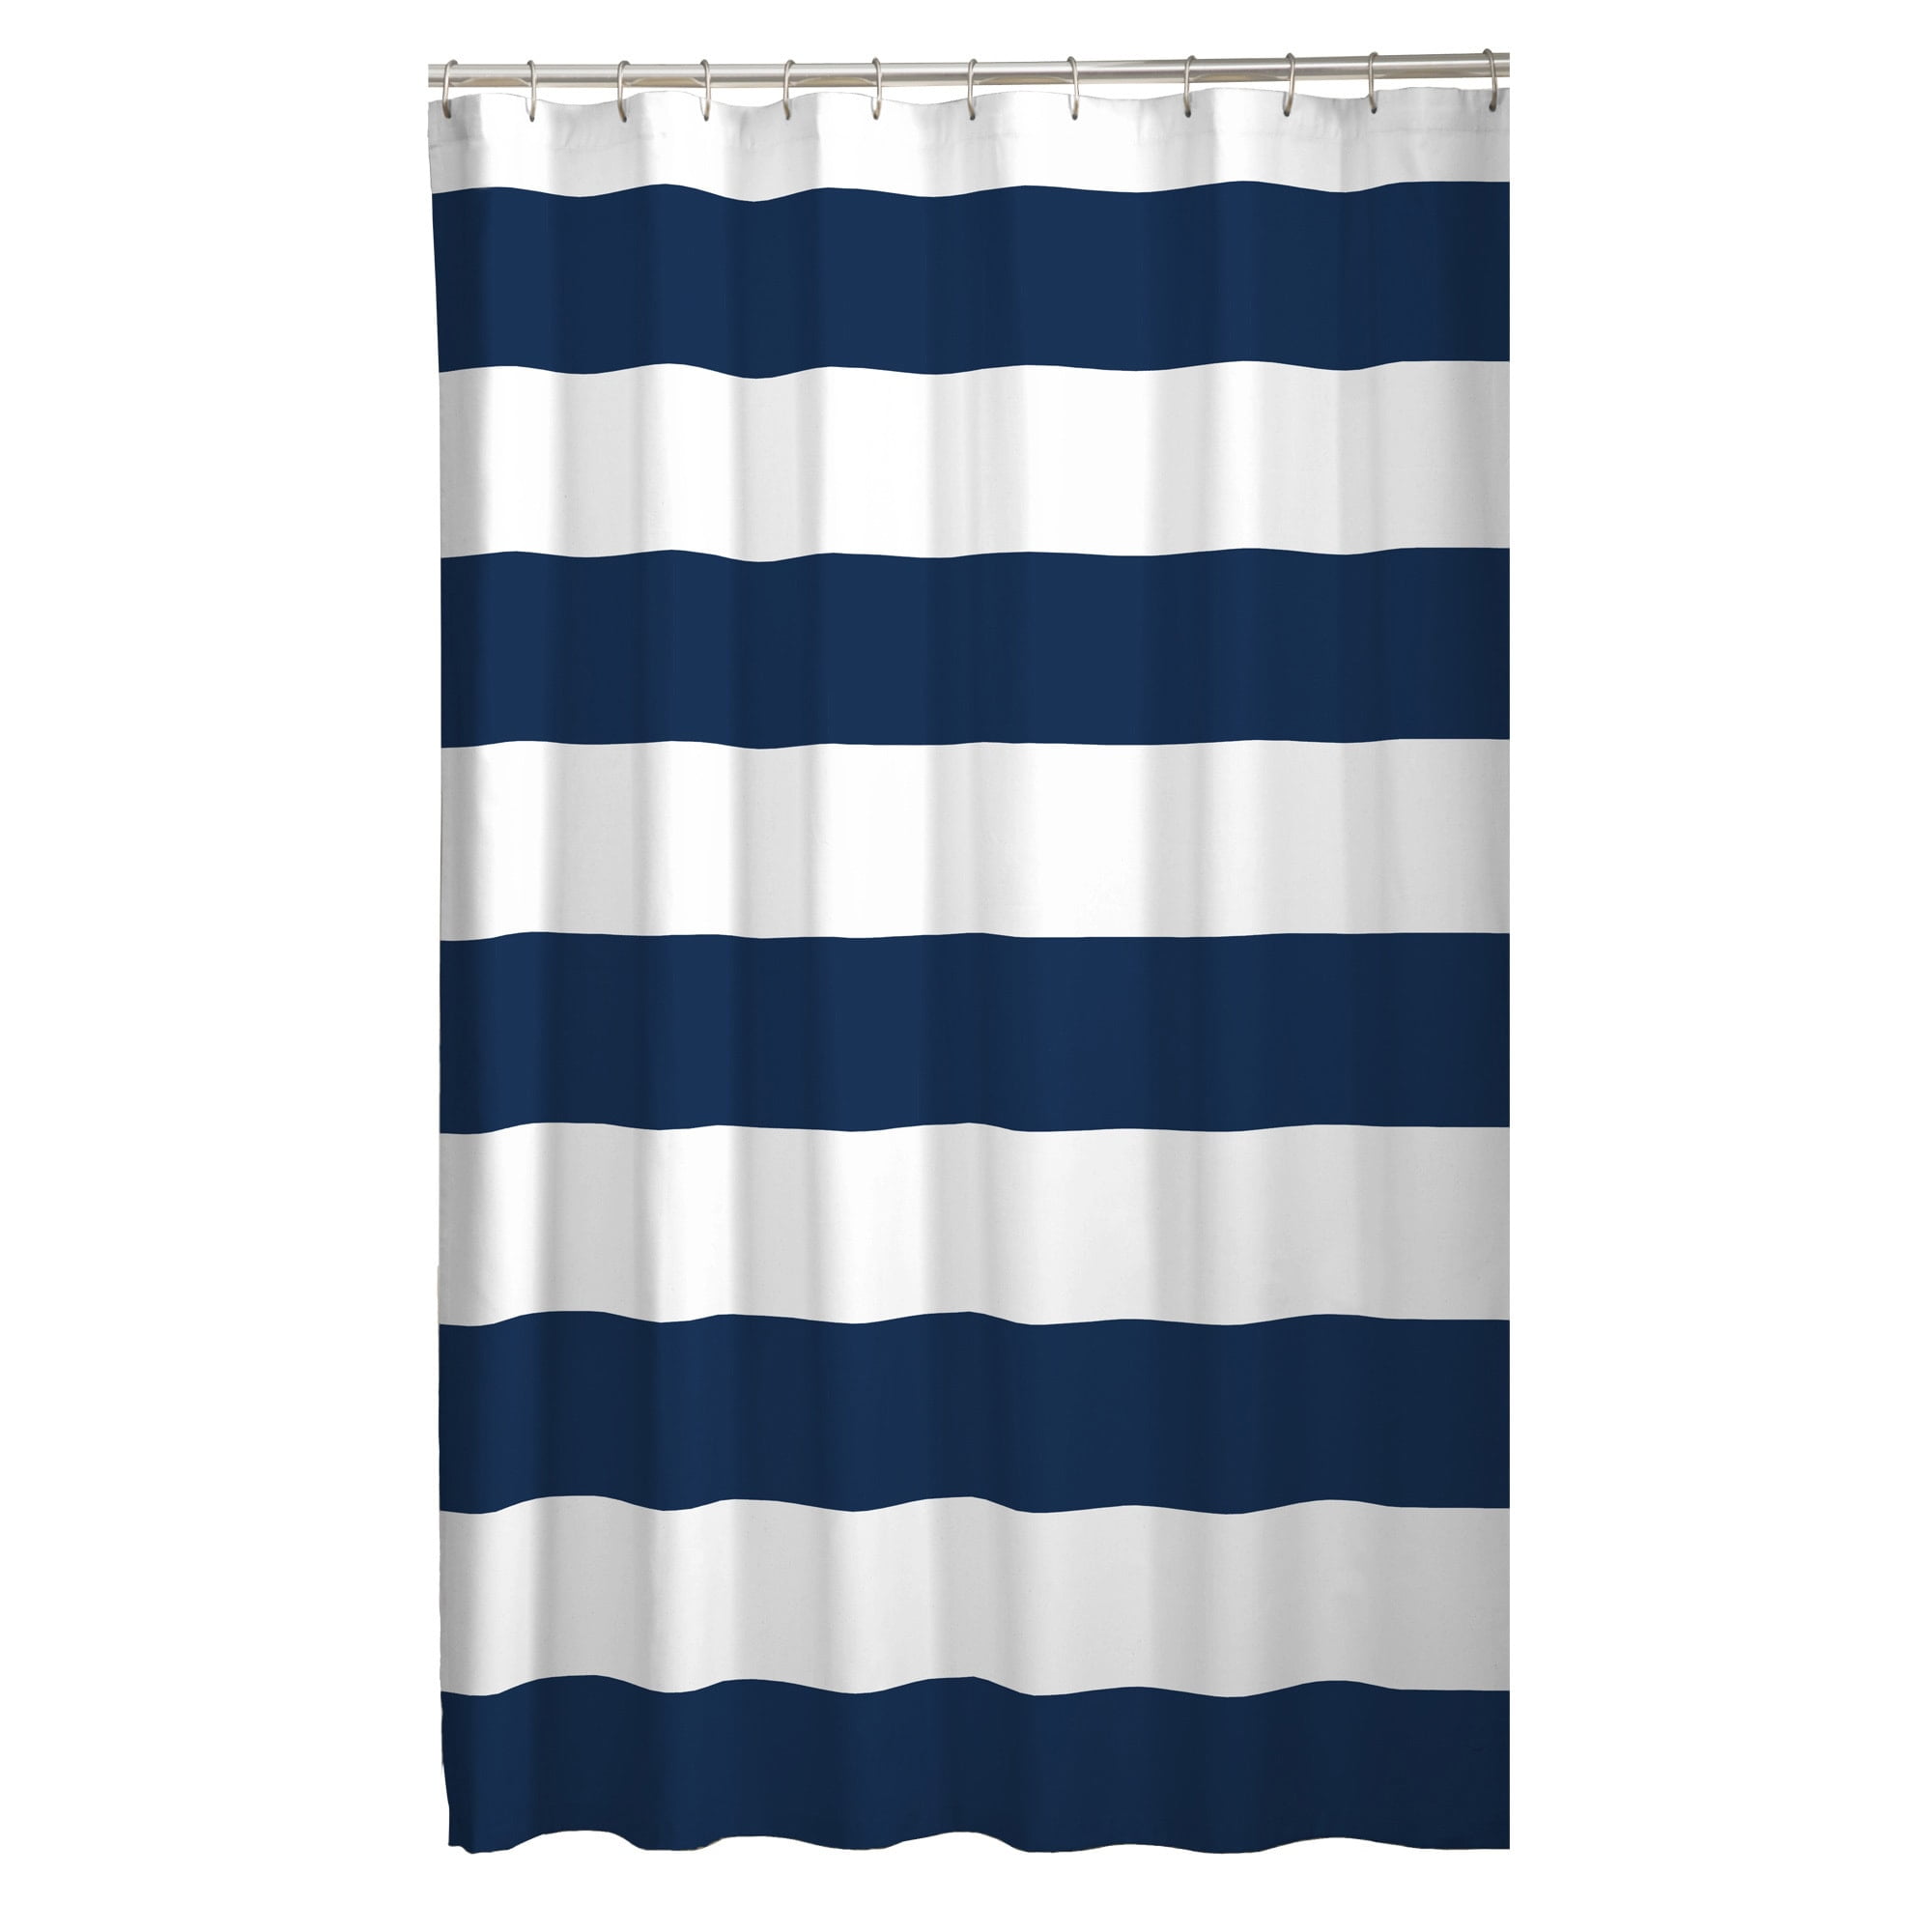 STRIPED FABRIC SHOWER CURTAIN  by MAYTEX SIZE 72"X 72" NEW IN BAG 